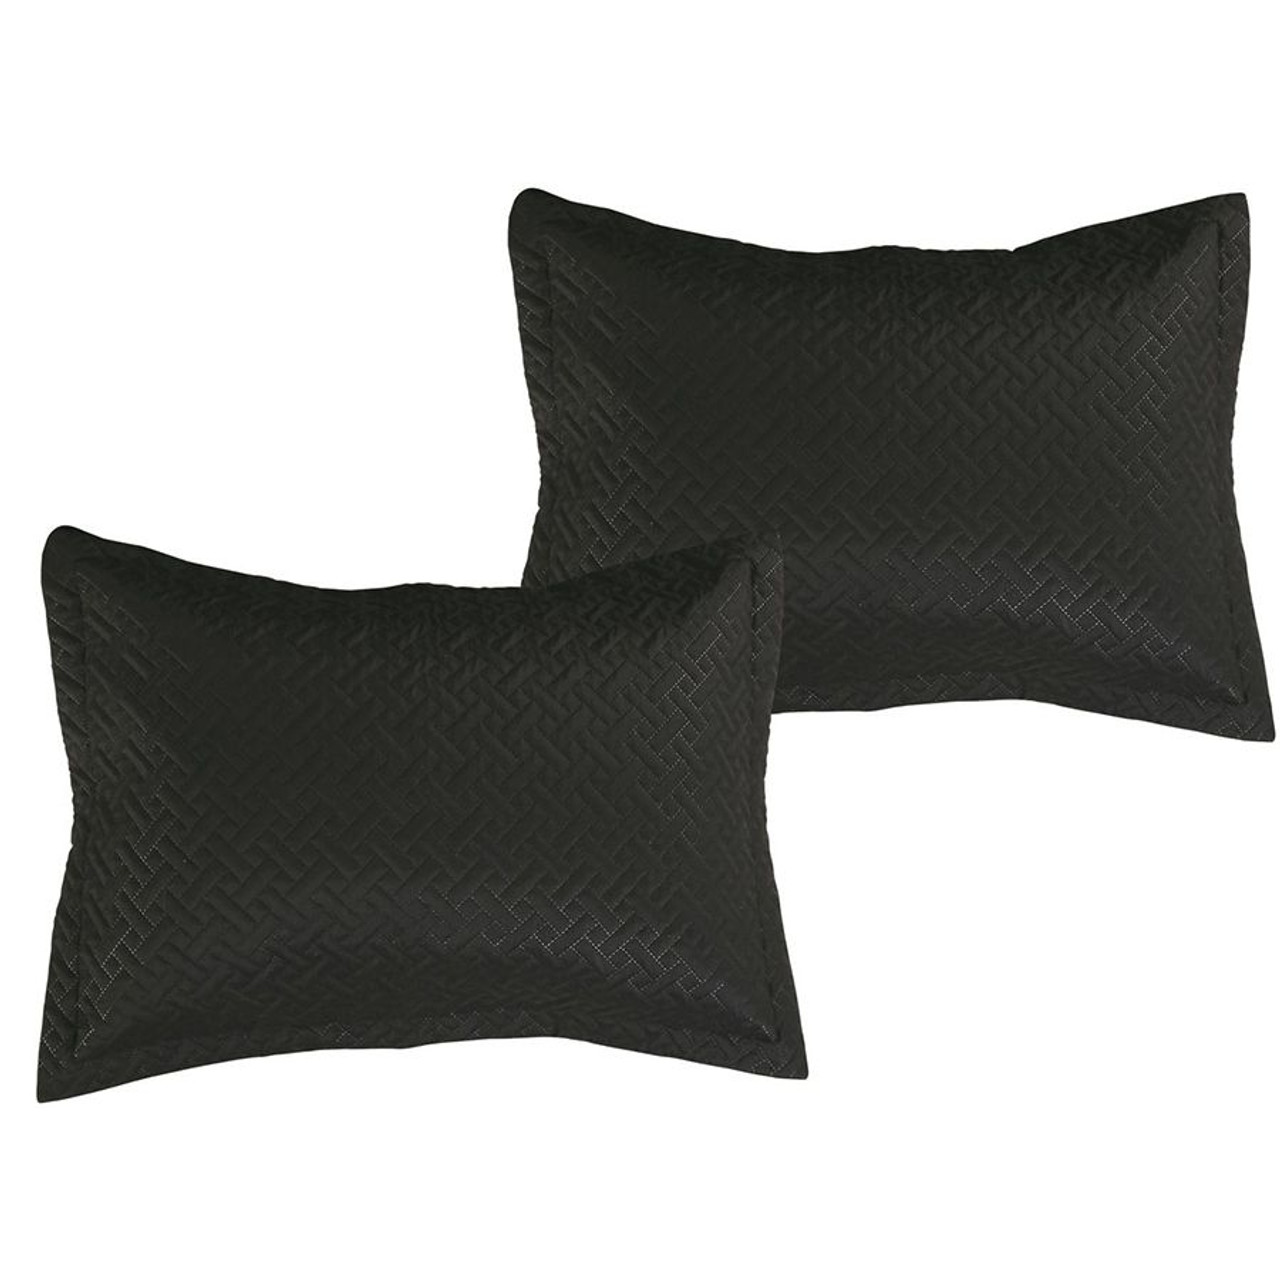 3 PC Squared Stitched Pinsonic Reversible Oversized Bedspread Black Color